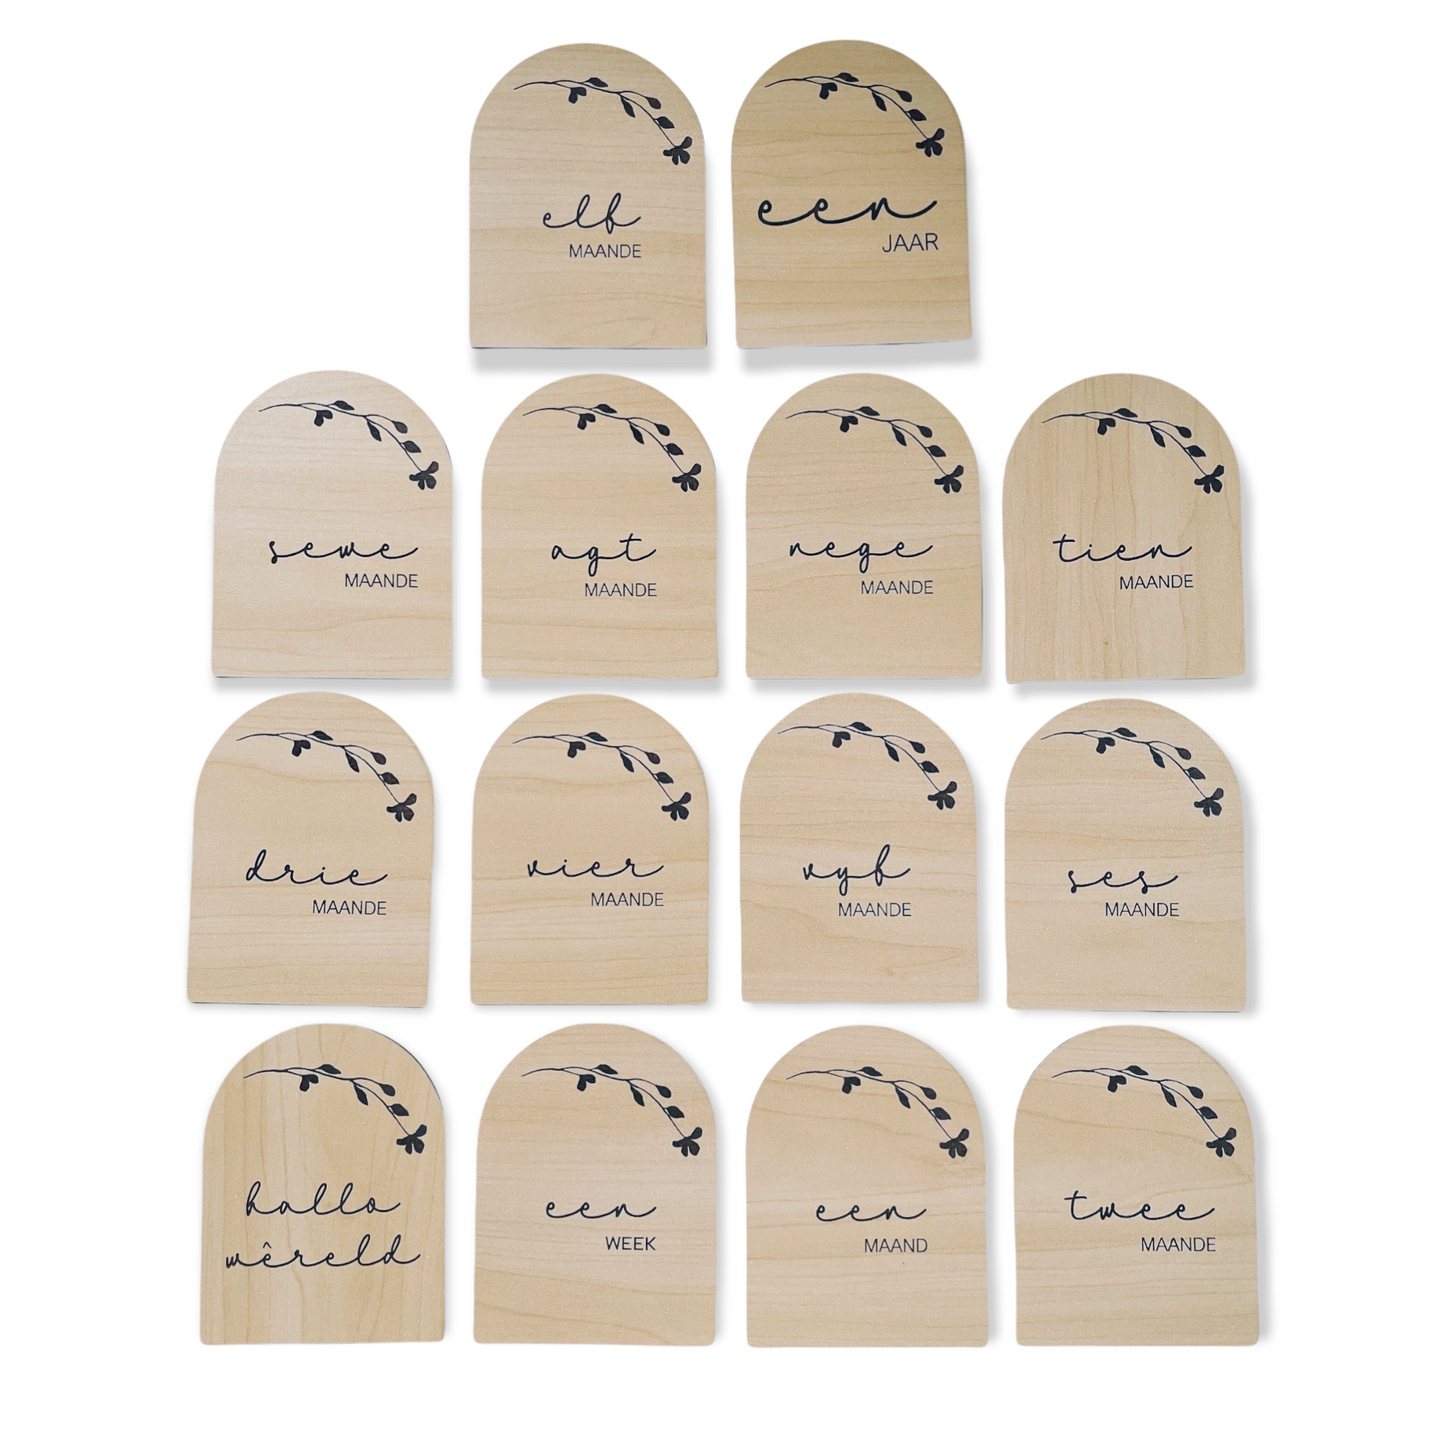 Capture your little one's milestones with our beautiful engraved wooden milestone cards. Our arched milestone cards come in a keepsake box, making it the perfect gift for any new parent.